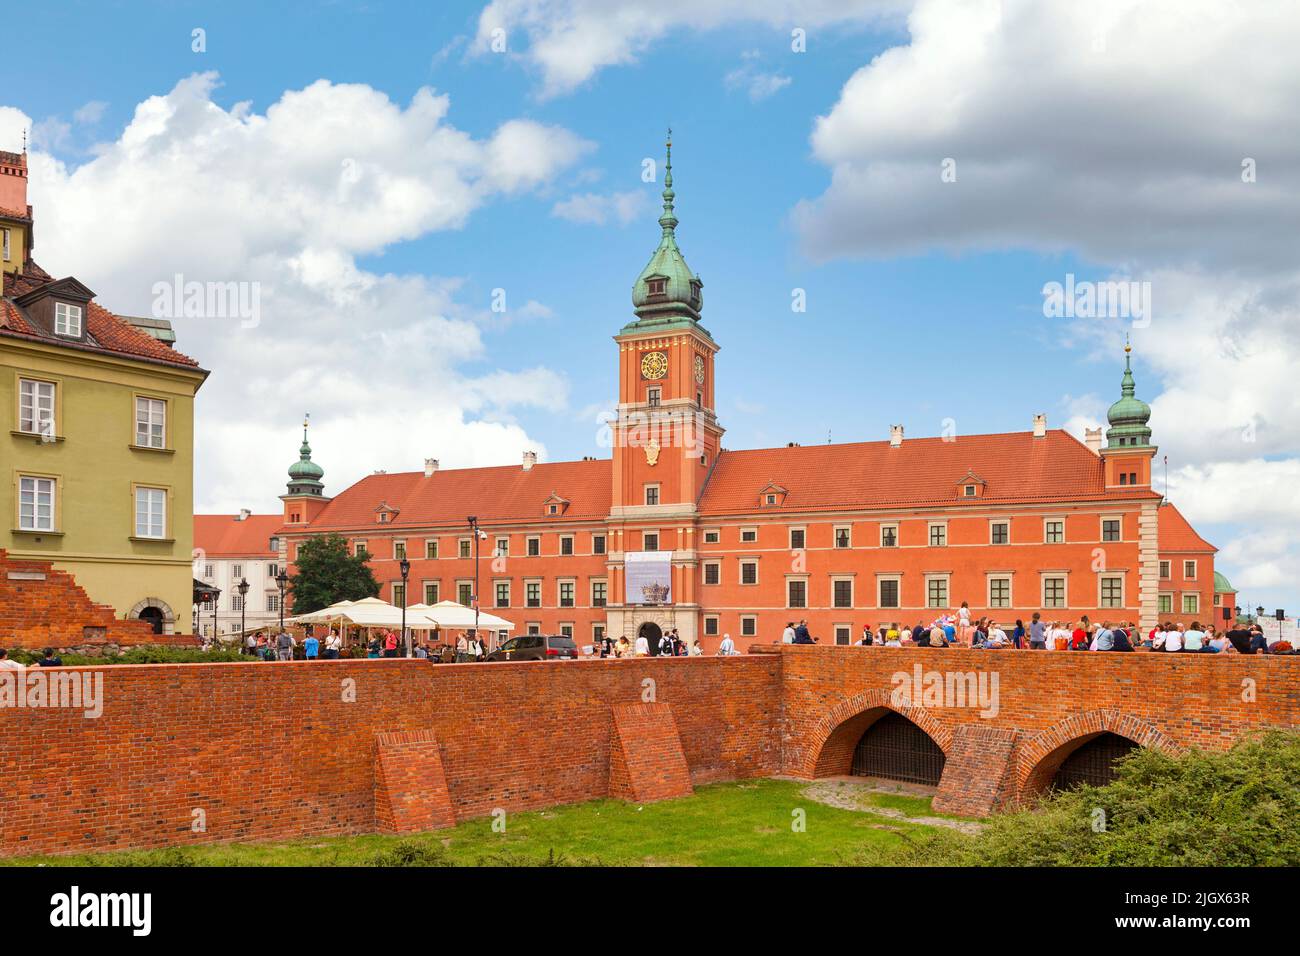 Warsaw, Poland - June 08 2019: The Royal Castle of Warsaw is a castle residency that formerly served as the official residence of the monarchy. Stock Photo